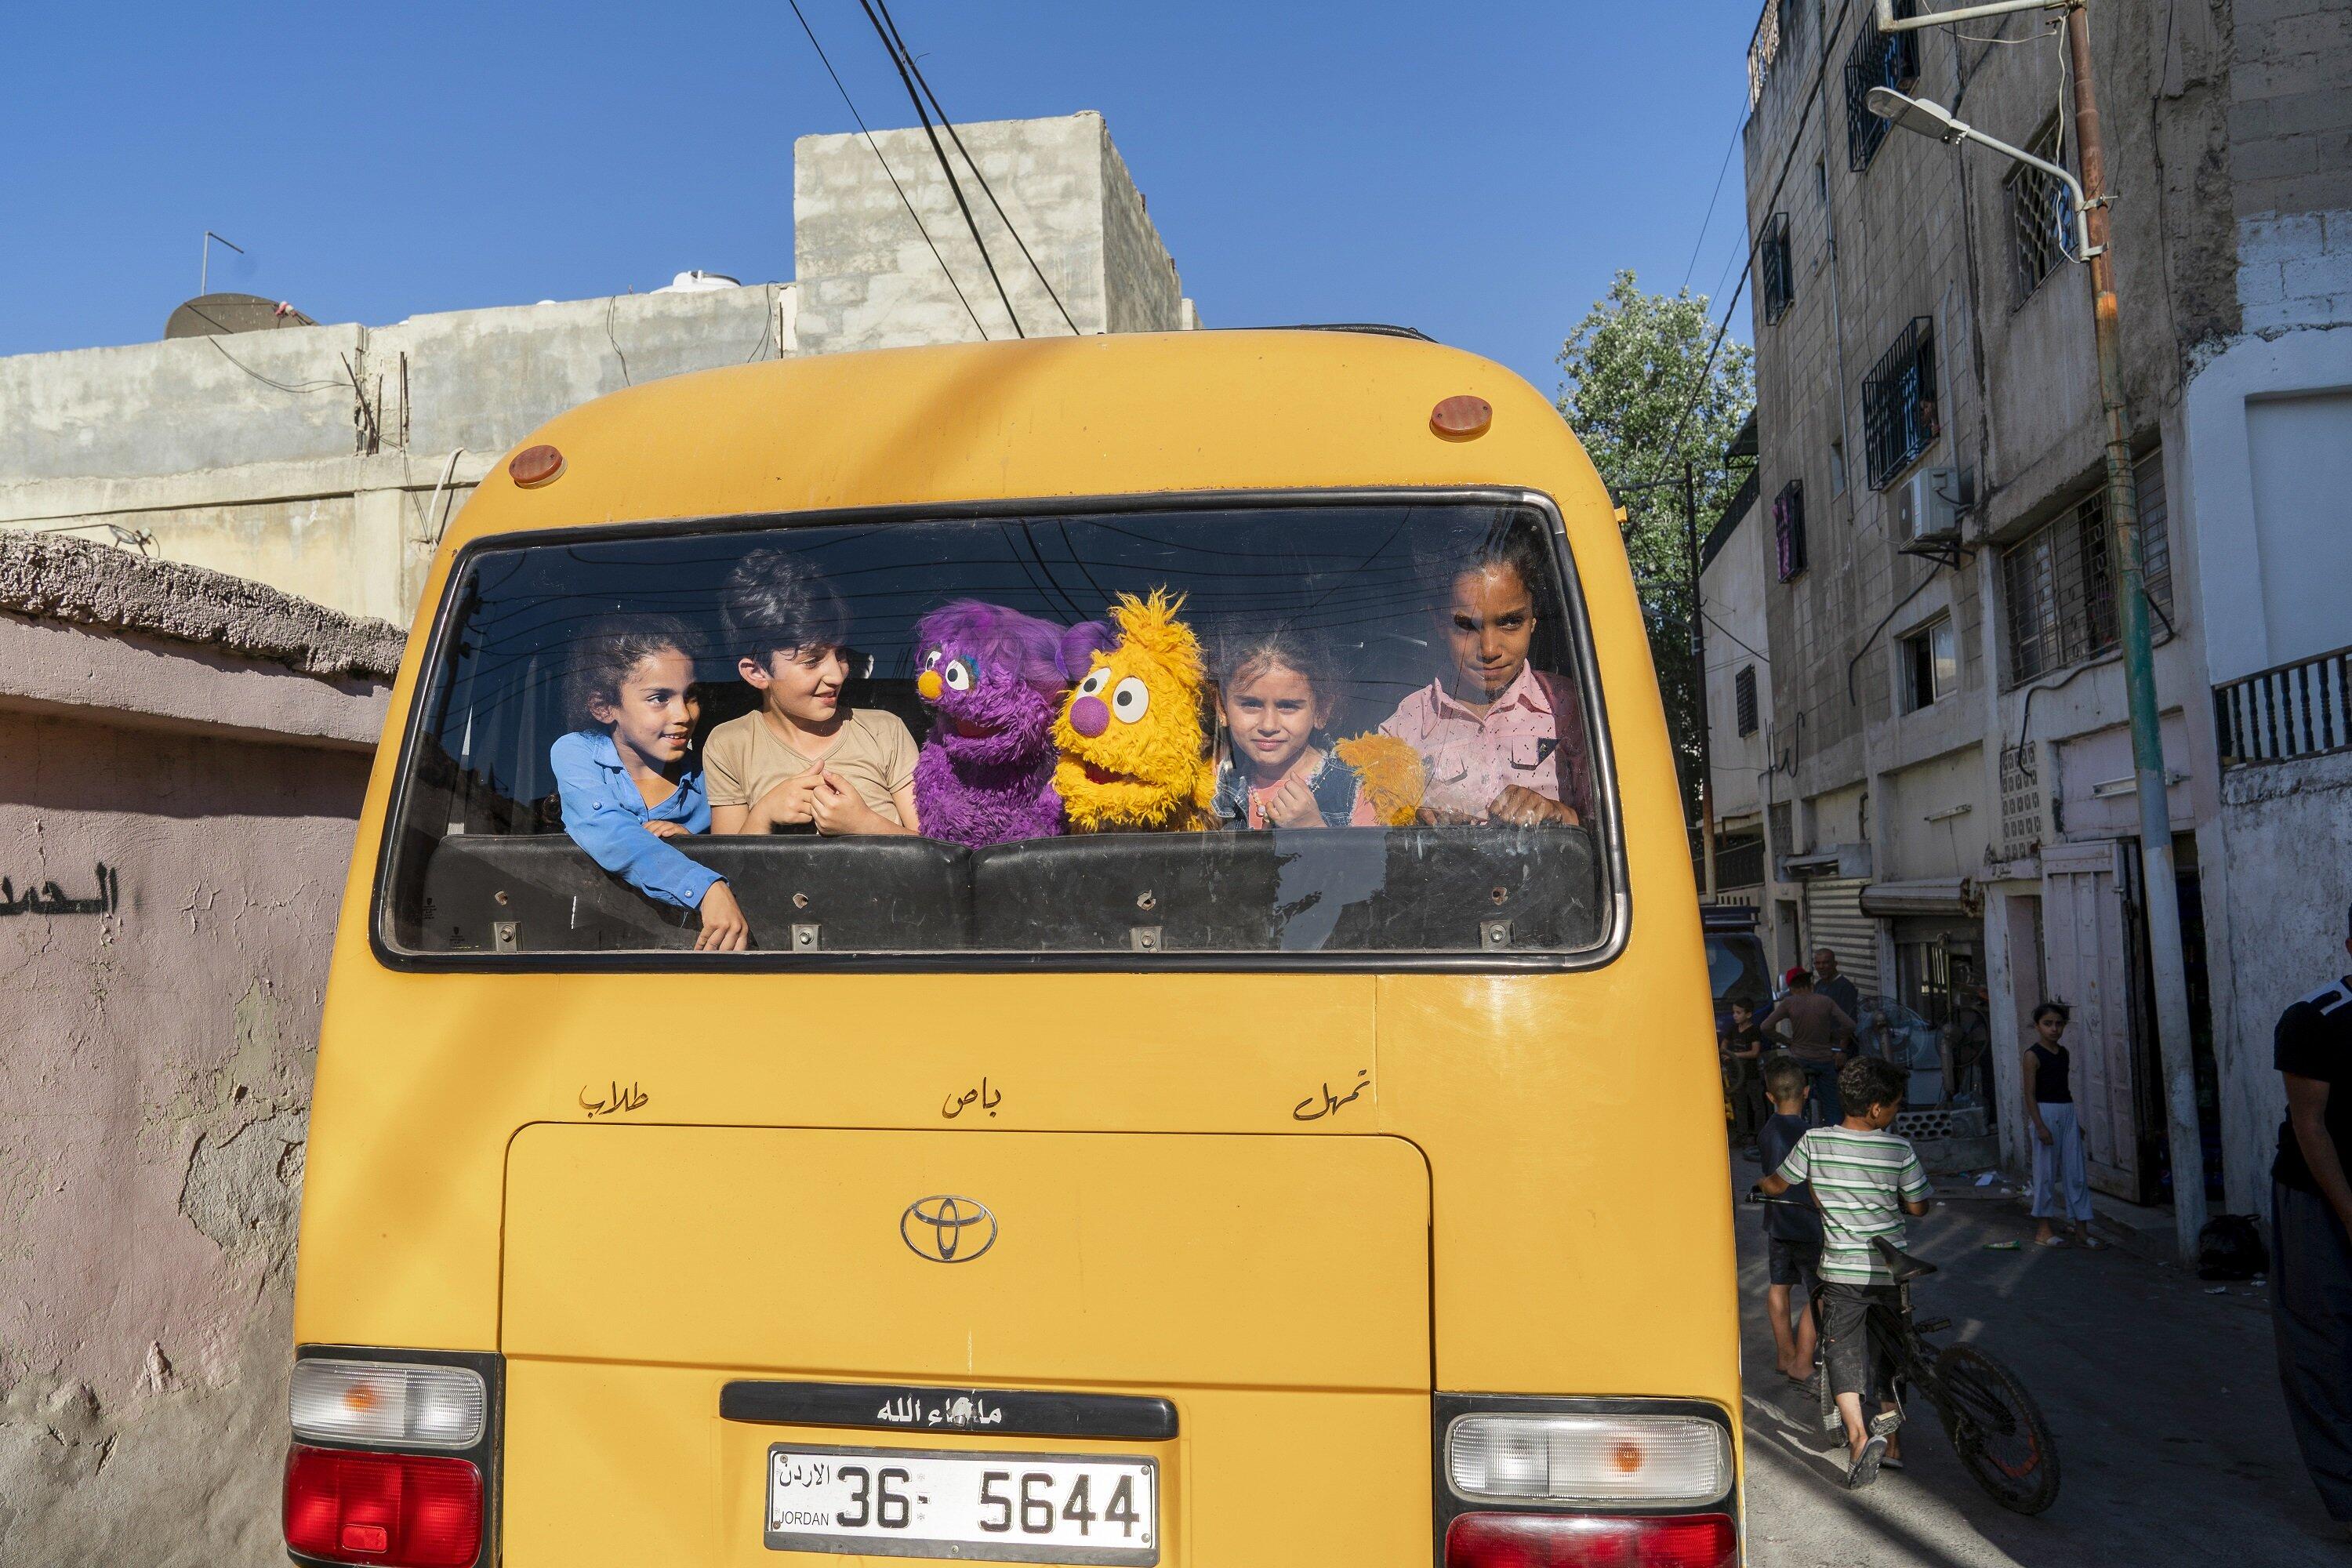 Kids and sesame street puppets looking out of the back window of a bus